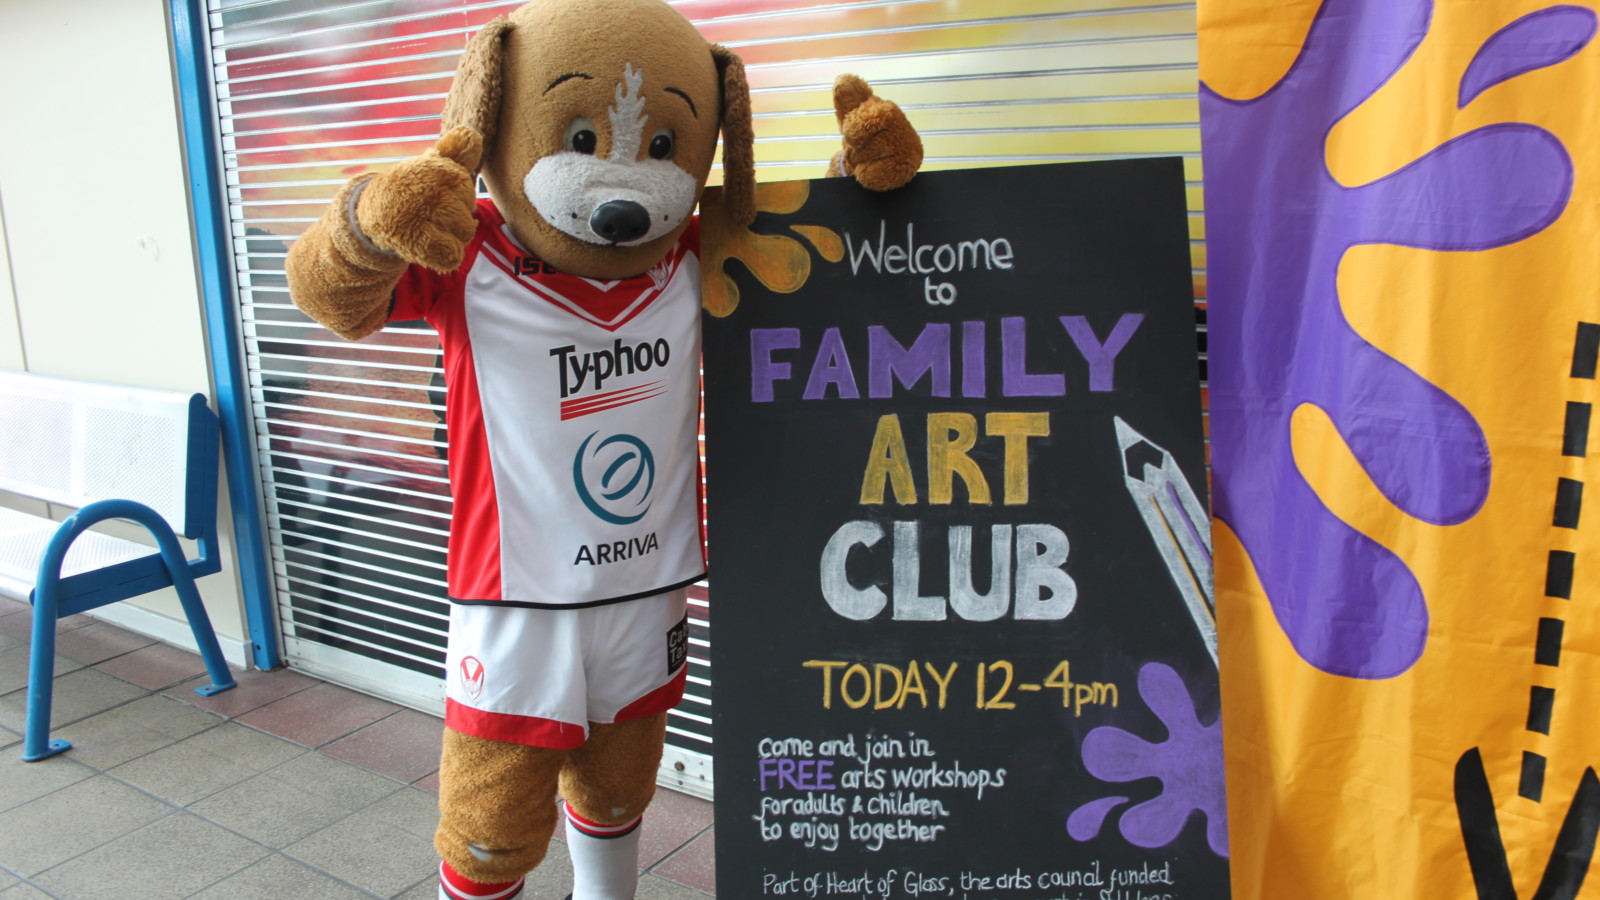 A mascot which is a dog dressed in a white and red rugby kit stands with two thumbs up in front of a window and next to a blackboard sign. The sign reads Welcome to Family Art Club